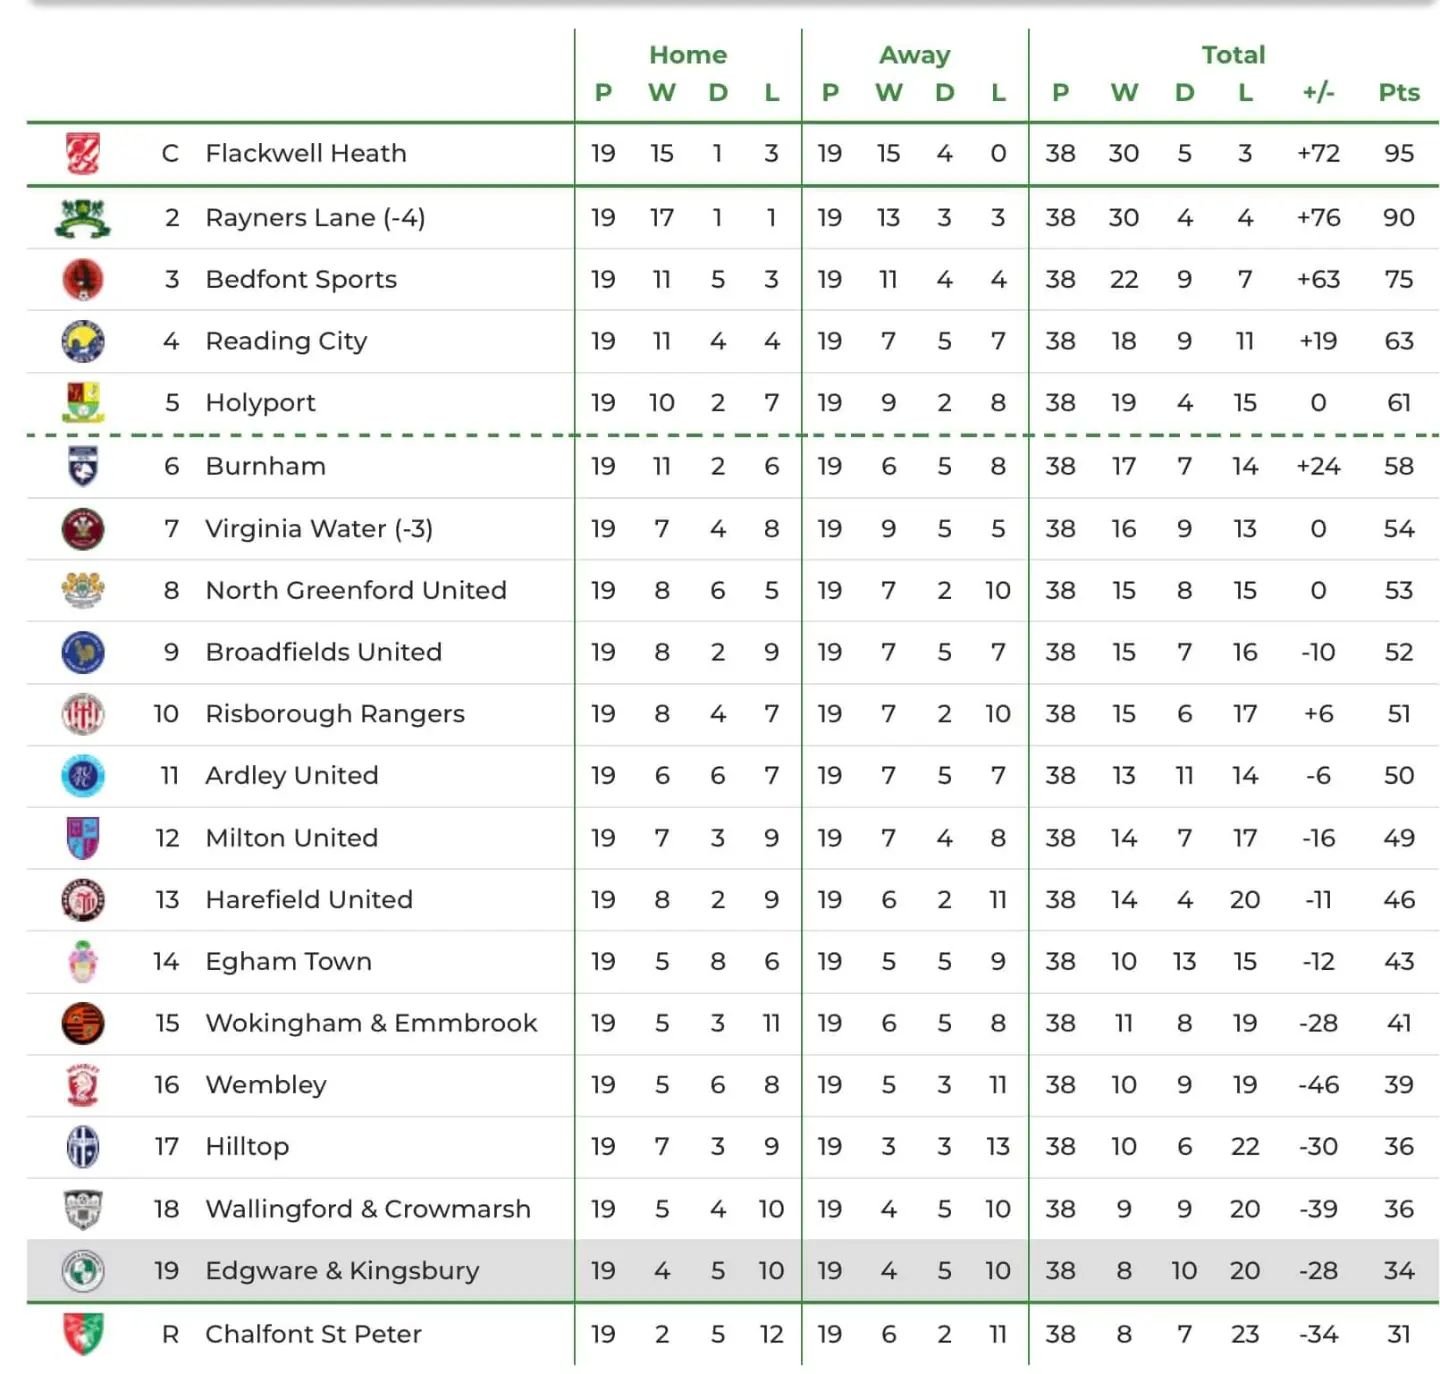 Here's the final 2023/24 CCL Premier Division North table

Champions - Flackwell Heath
Playoff Winners - Rayners Lane
Relegated - Chalfont St Peter